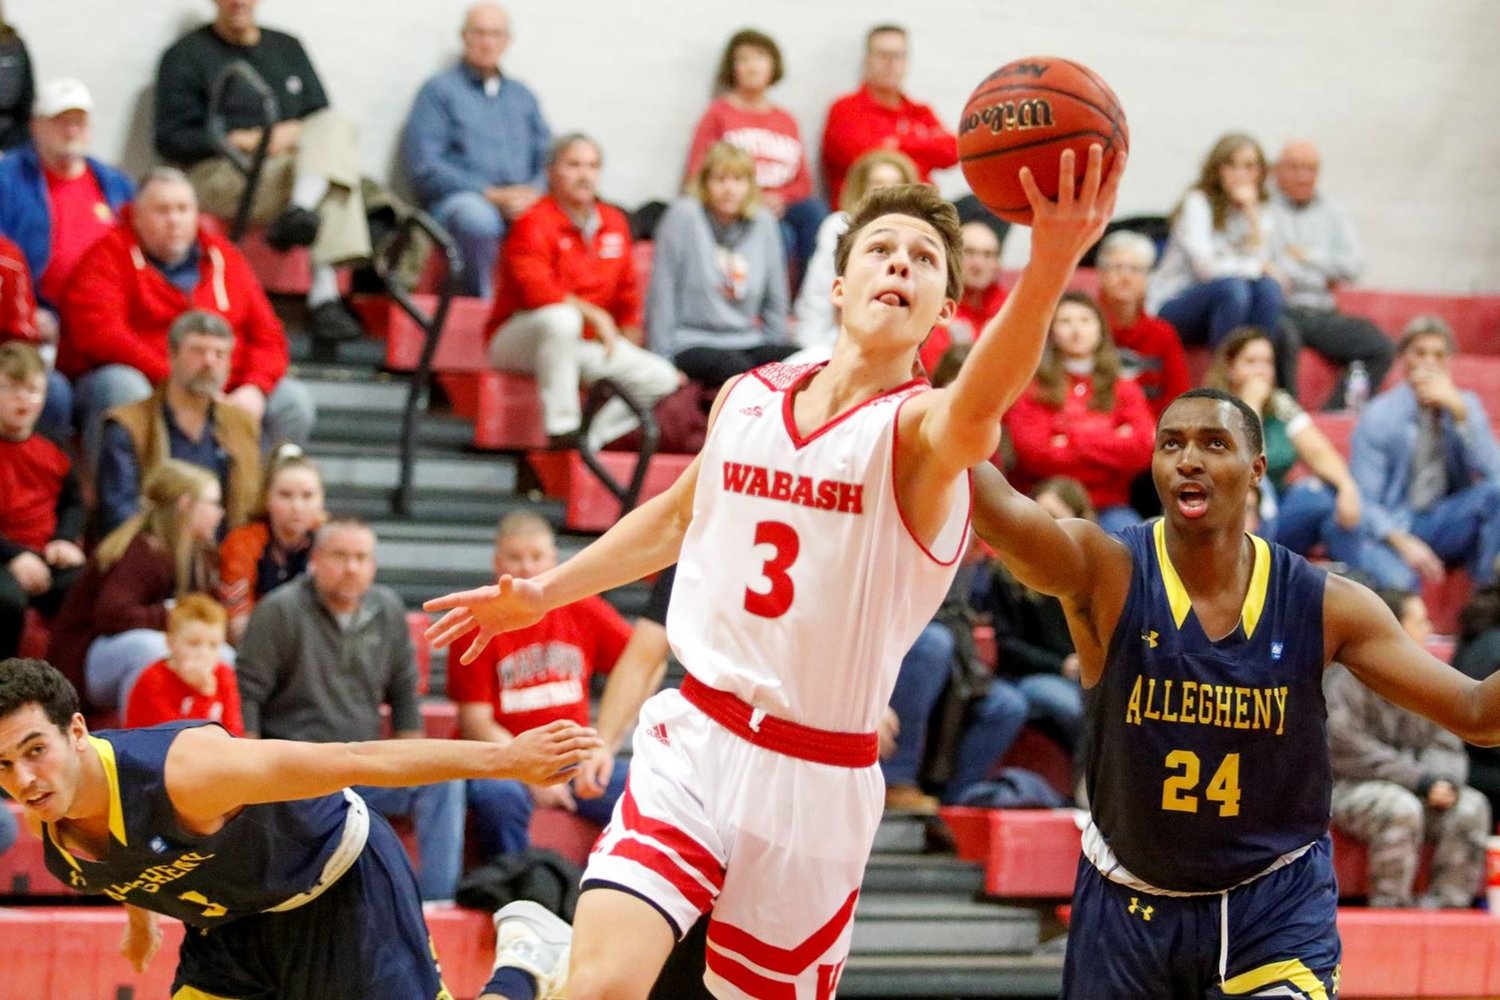 Jack Davidson leaves Wabash College as it’s All-Time leading scorer with 2,464 career points, a two-time academic first-team All-American and two time North Coast Athletic Conference Player of the Year. Davidson can now put the cherry on top with the Jostens Trophy as the best player in all of Division III.